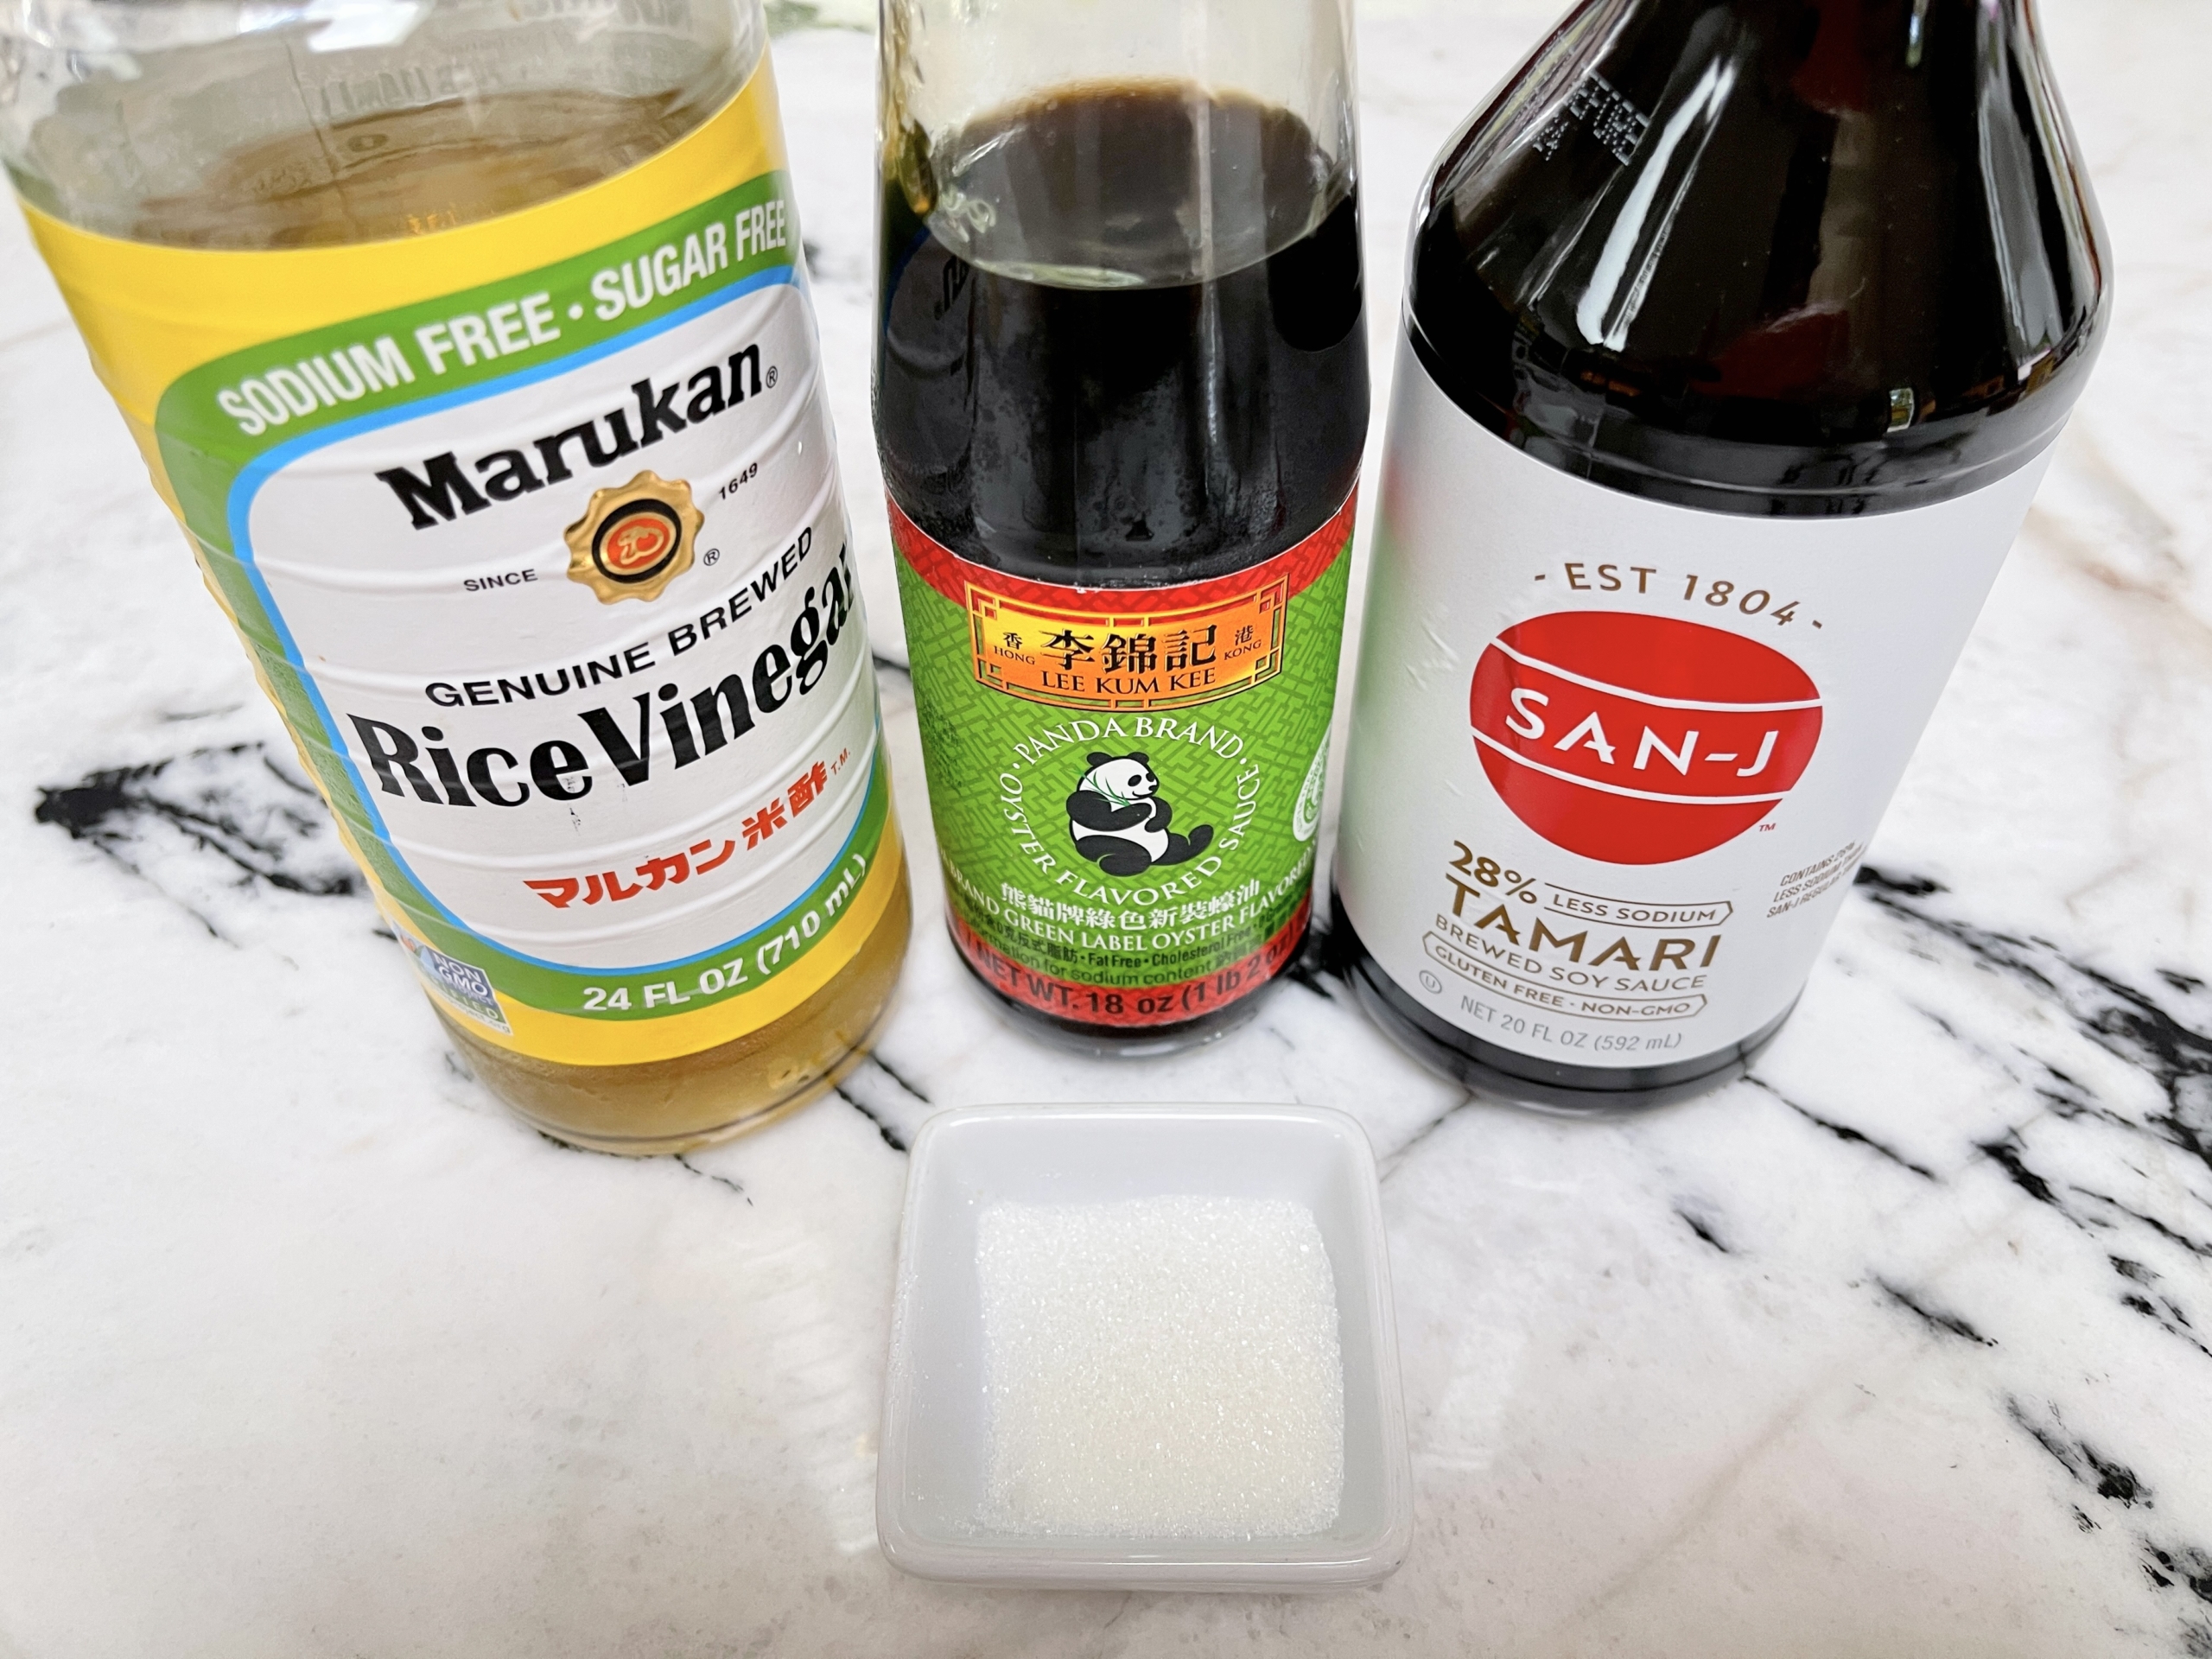 For the sauce - gluten free soy sauce and oyster sauce, sugar, and rice vinegar